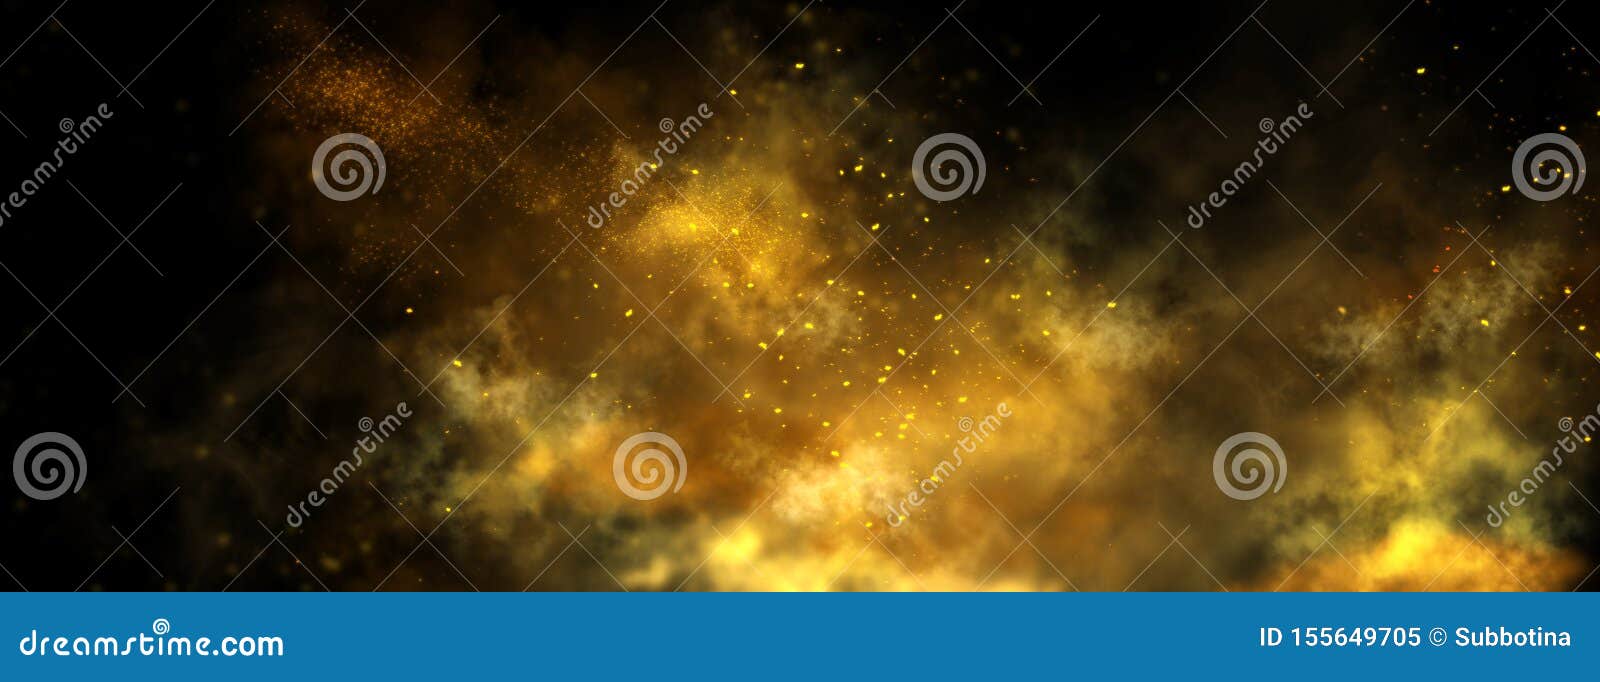 abstract gold dust background over black. beautiful golden art widescreen background